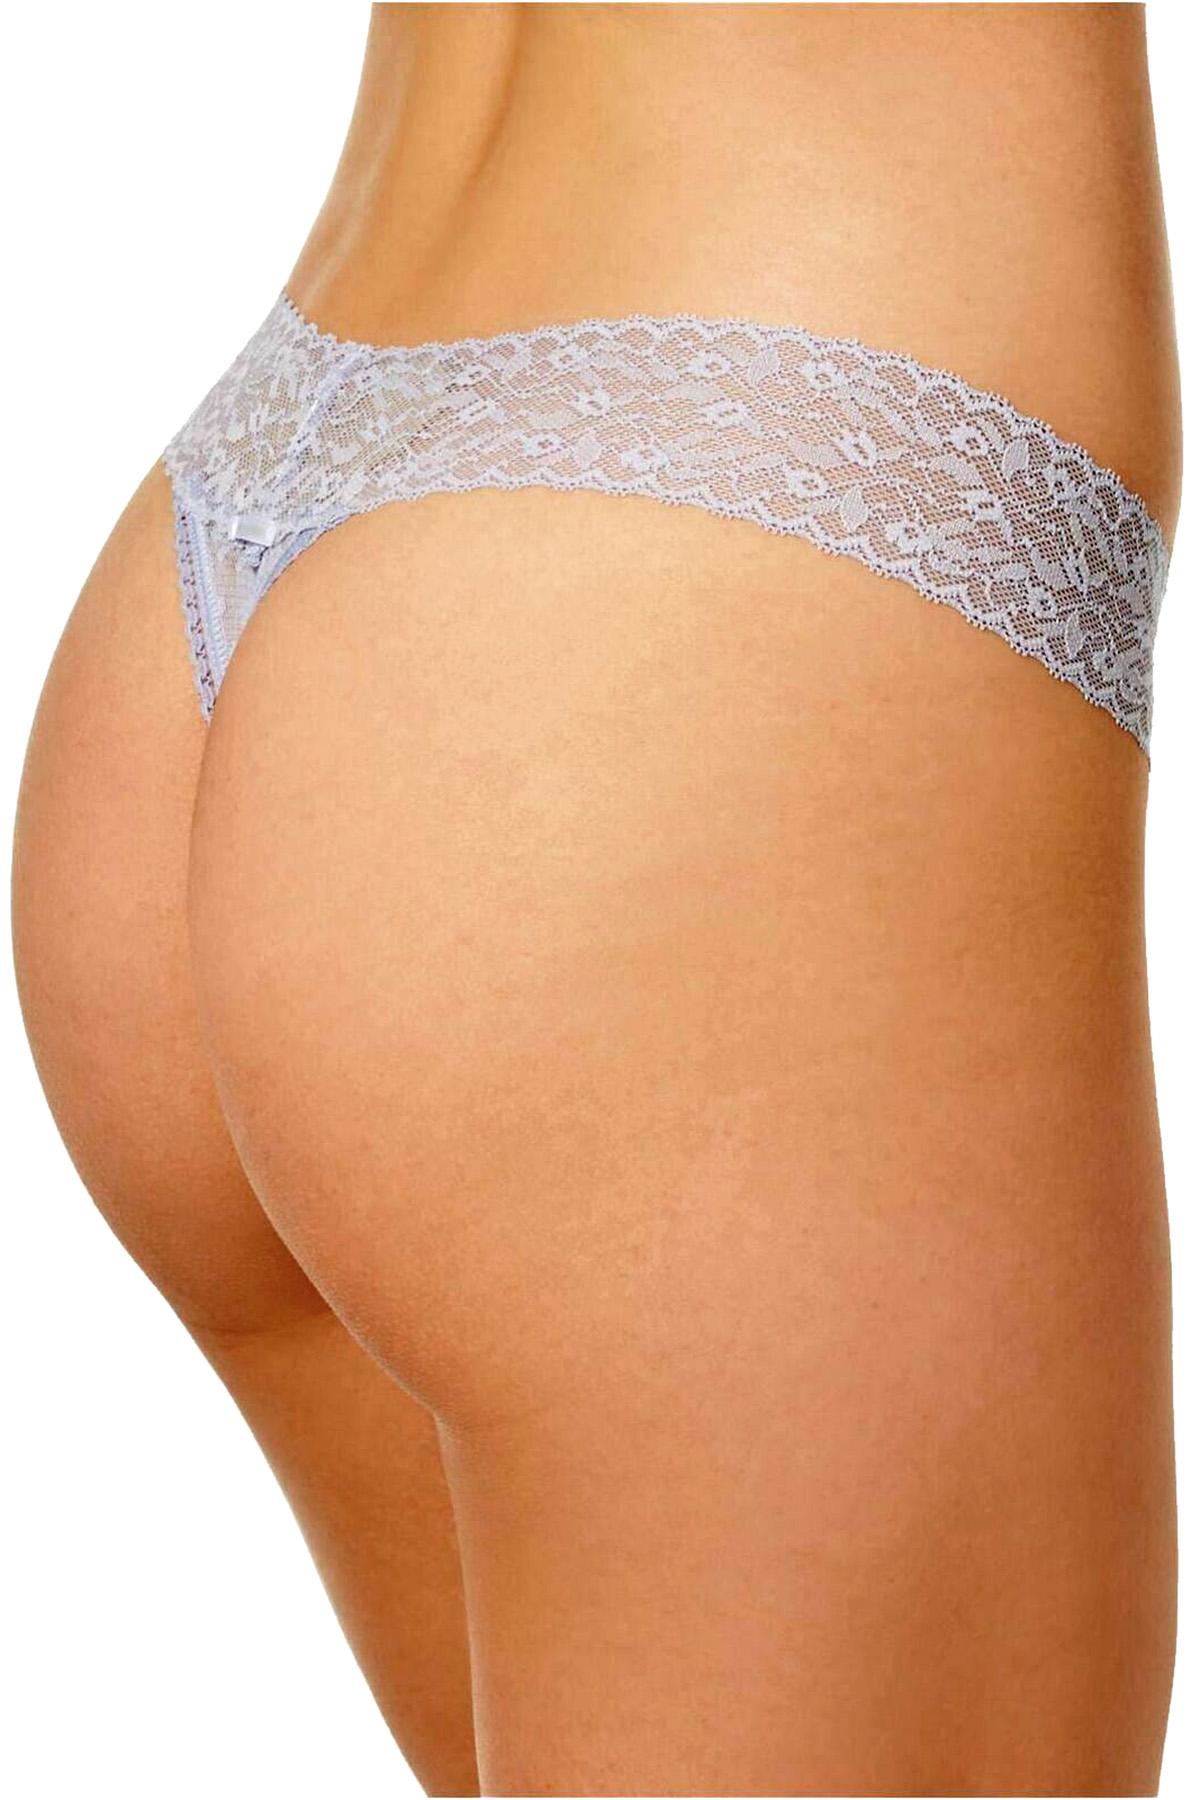 Calvin Klein Bliss Bare Lace Thong